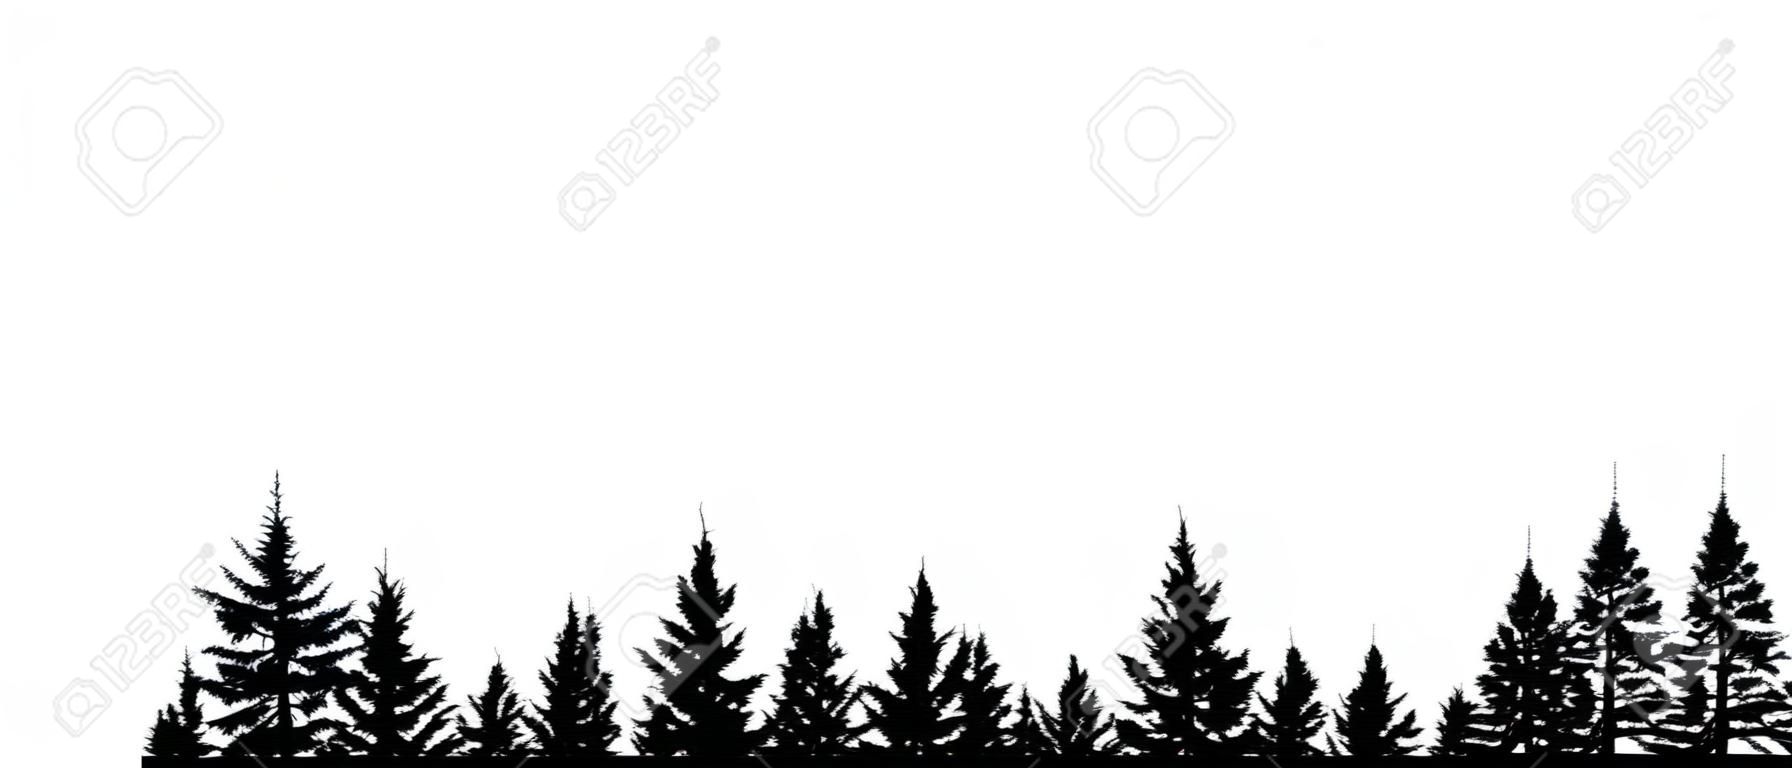 Forest evergreen, coniferous trees, silhouette vector background